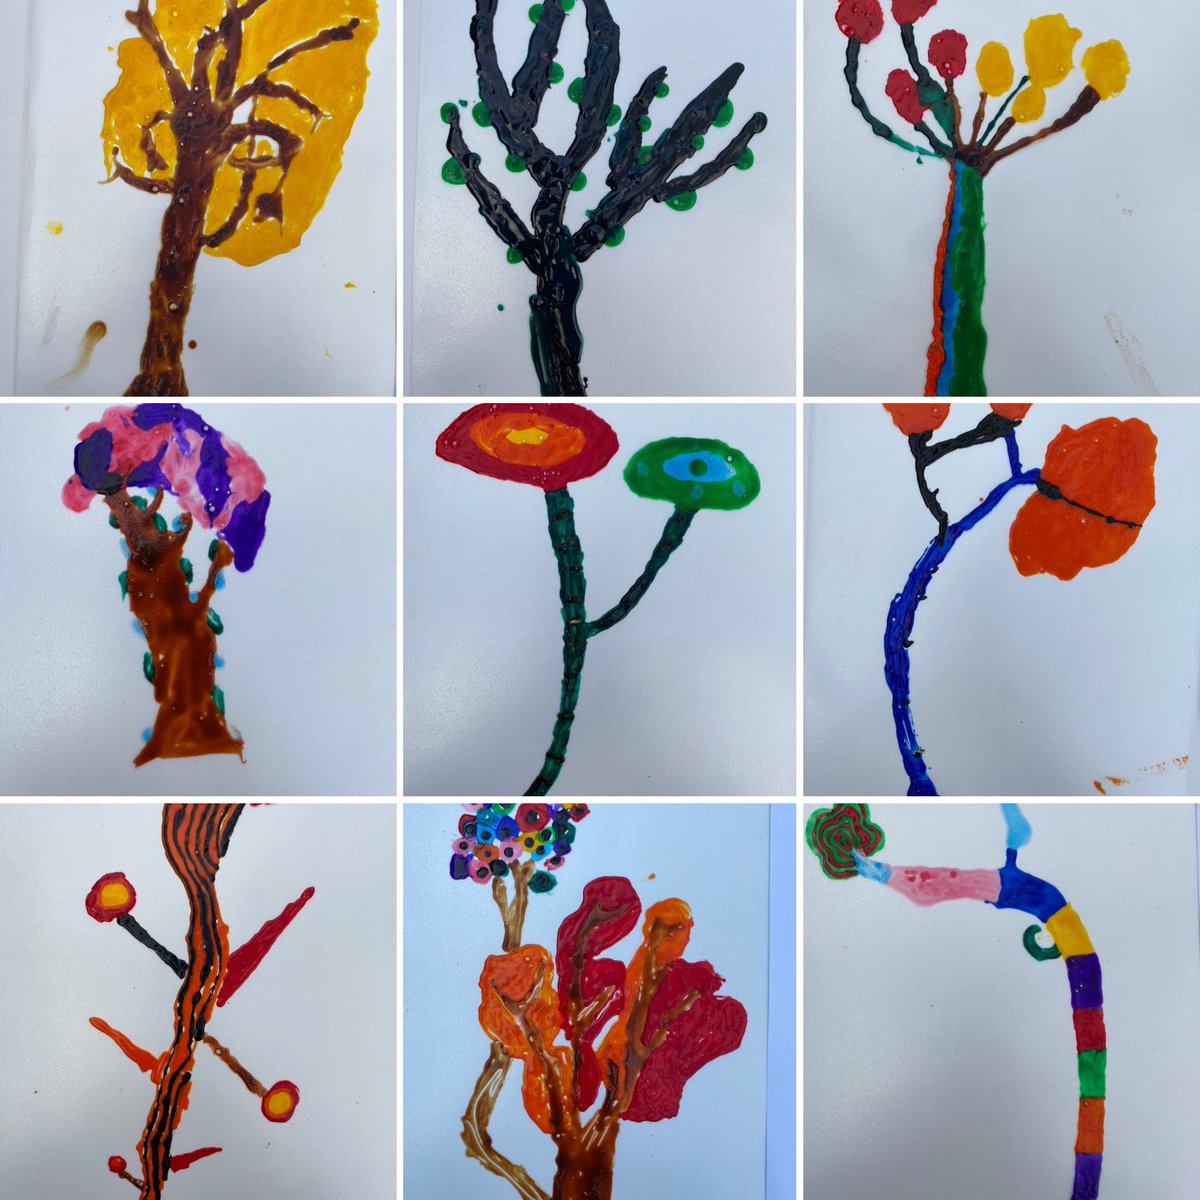 #SJCJuniors #SJCR11 have been creating stained glass trees in the style of #claricecliff as part of our colour theory topic! We are looking forward to seeing them up on the windows in the spring sunshine ☀️ #SJCArt